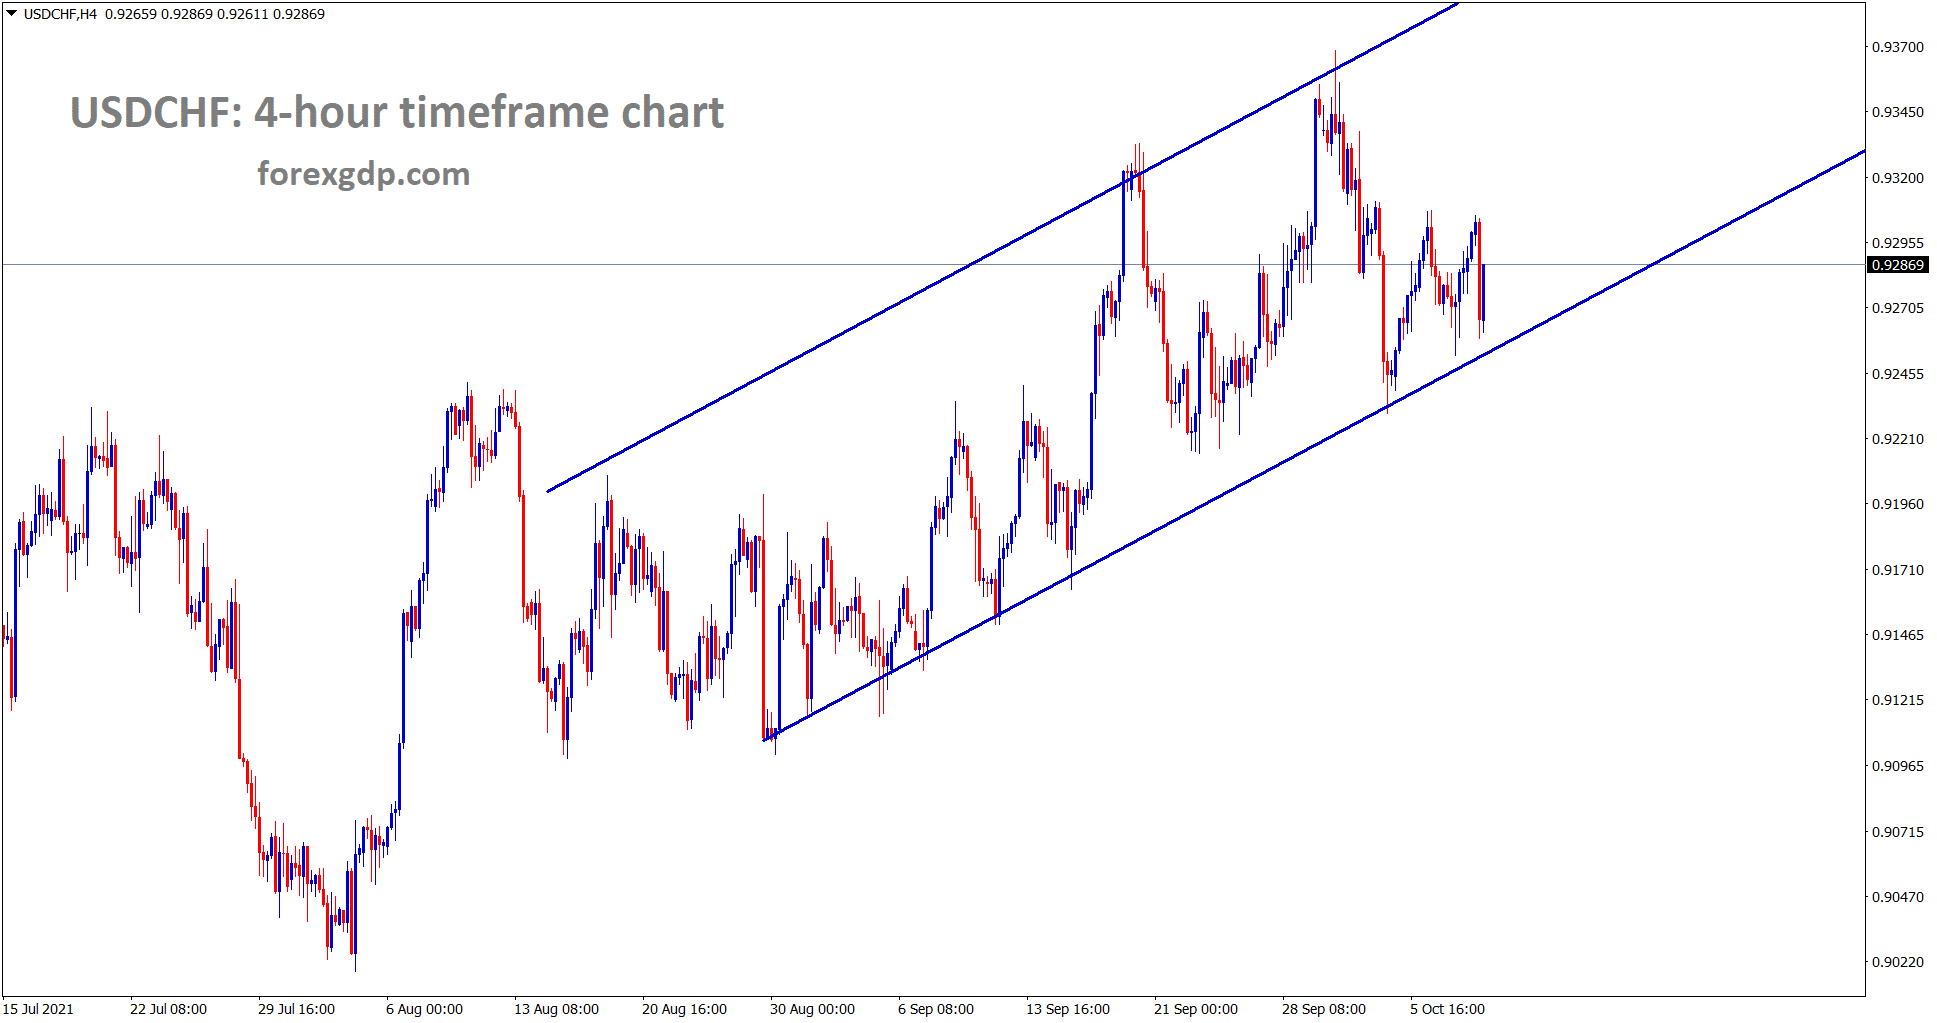 USDCHF is still moving in an ascending channel range for a long time